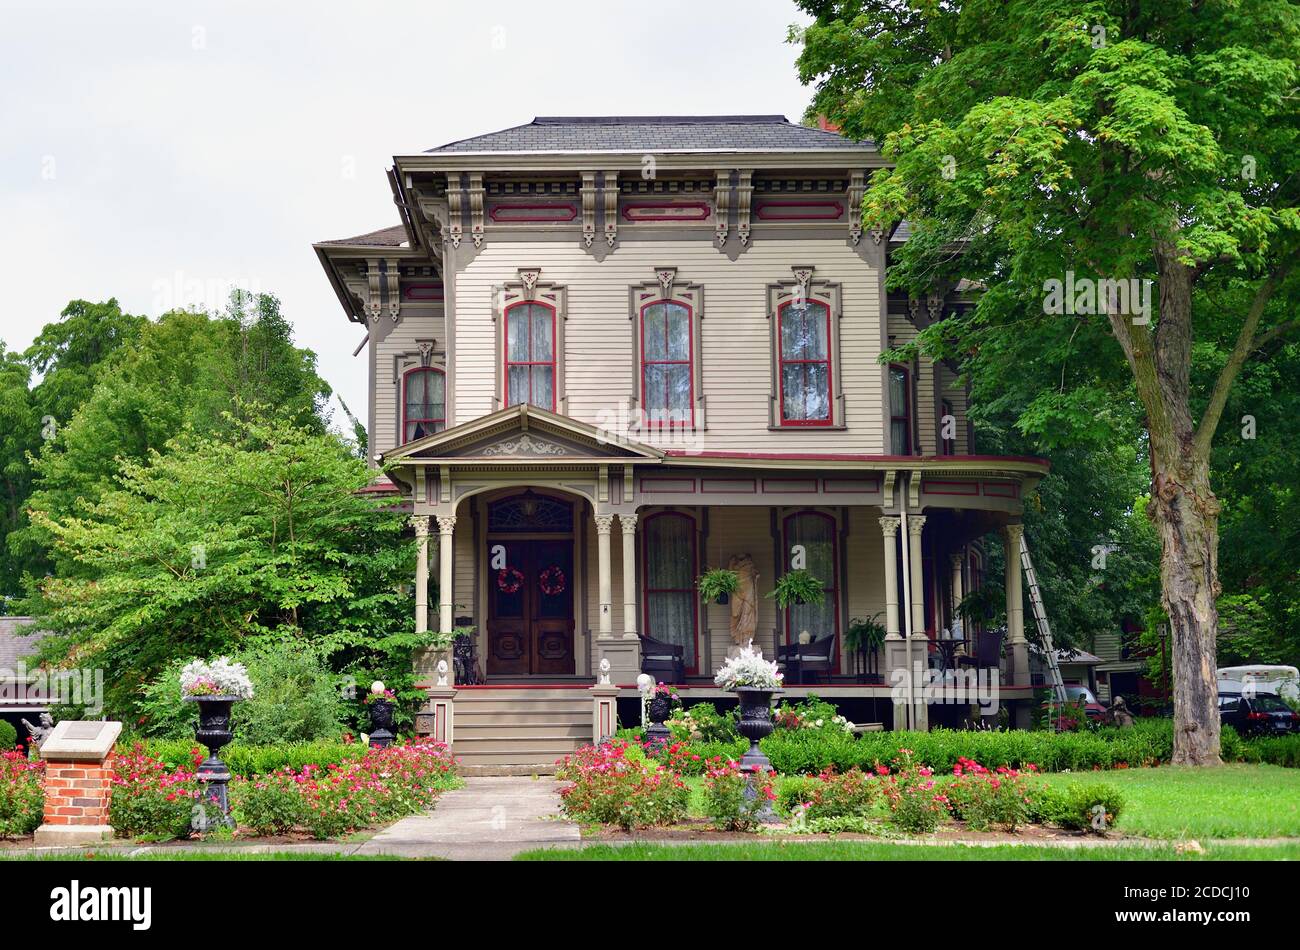 Sycamore, Illinois, USA. A beautifully restored and maintained home with a wrap around porch and extensive landscaping. Stock Photo